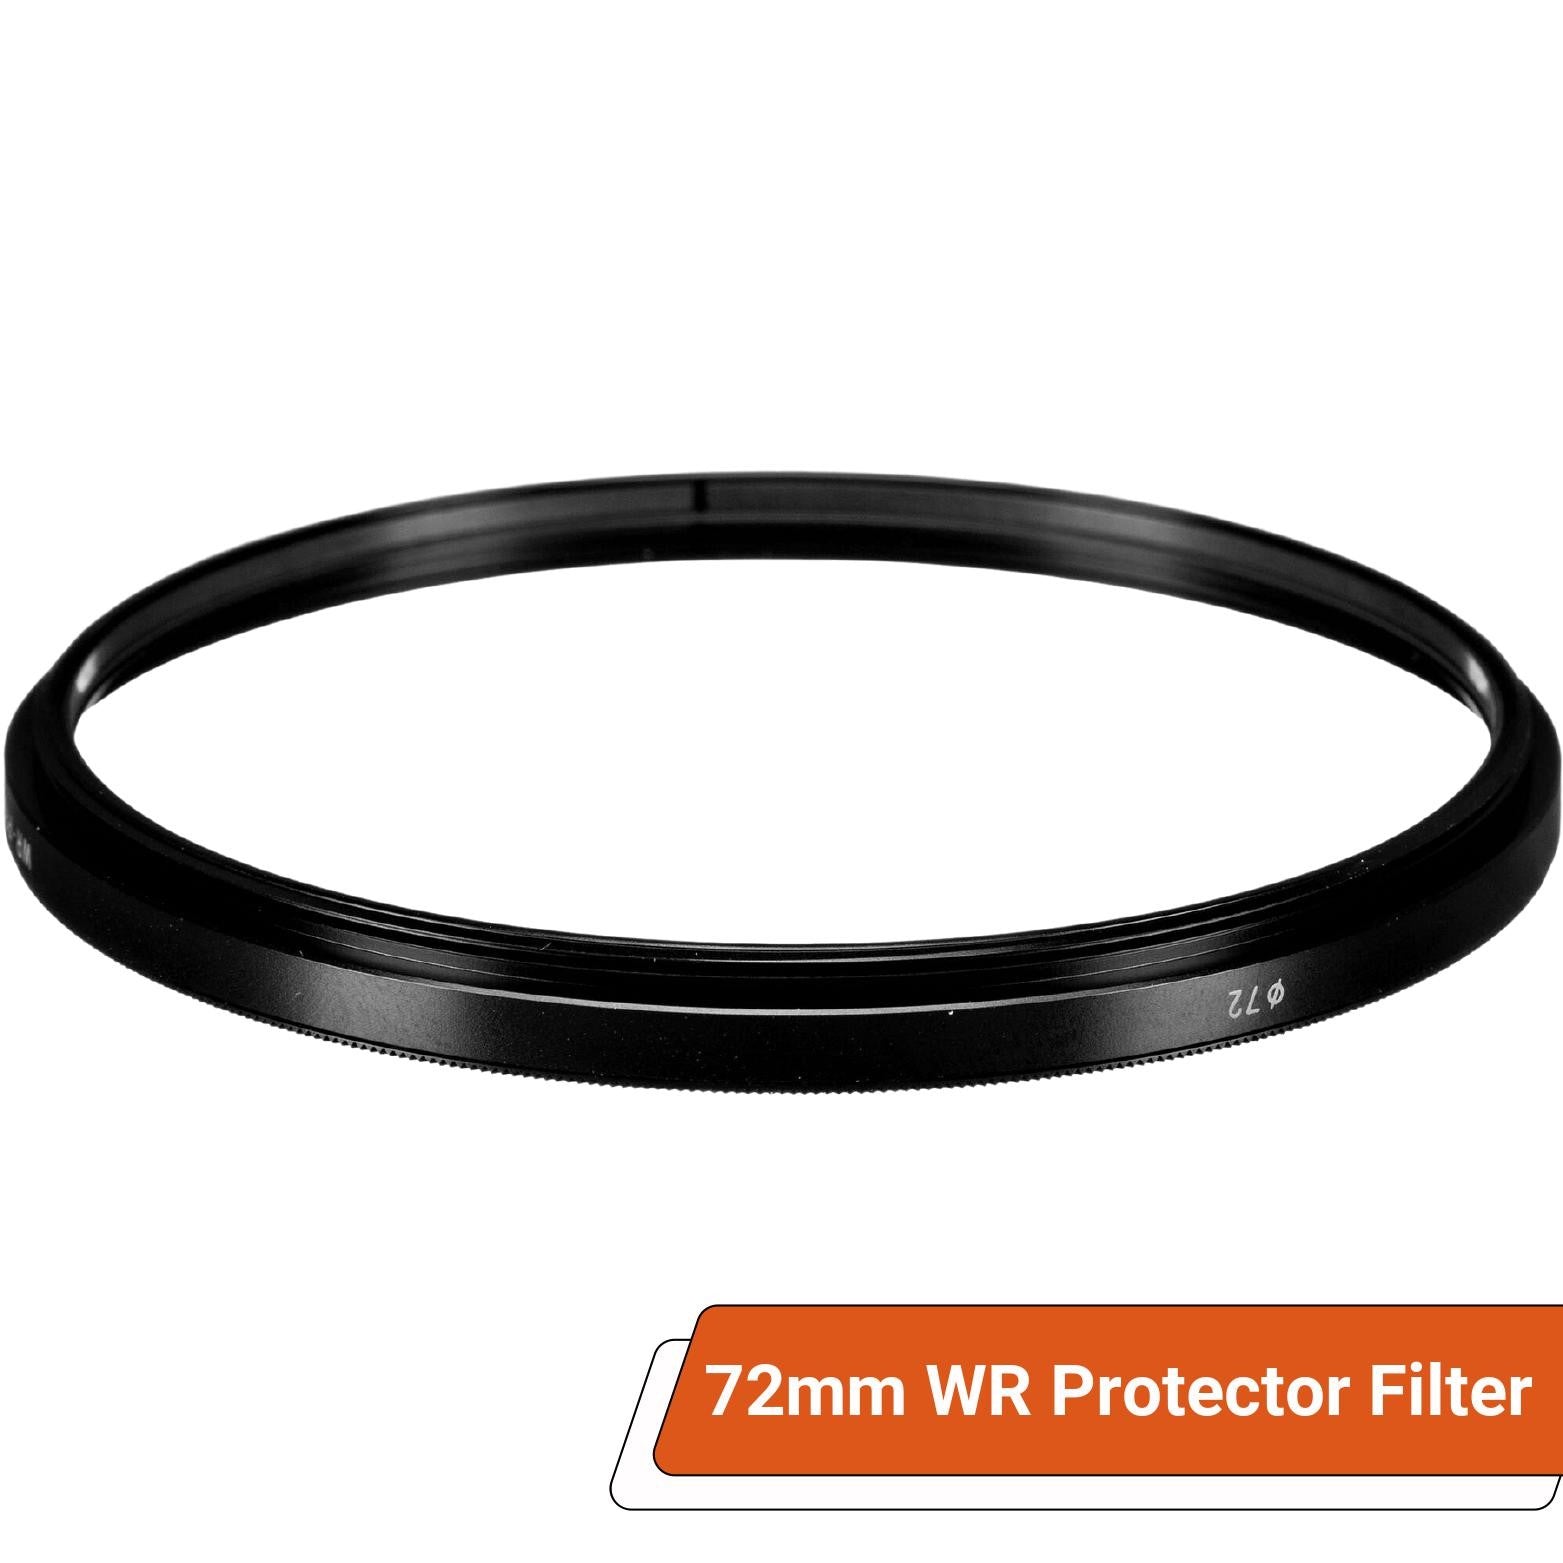 Sigma 72mm WR (Water Repellent) Protector Filter